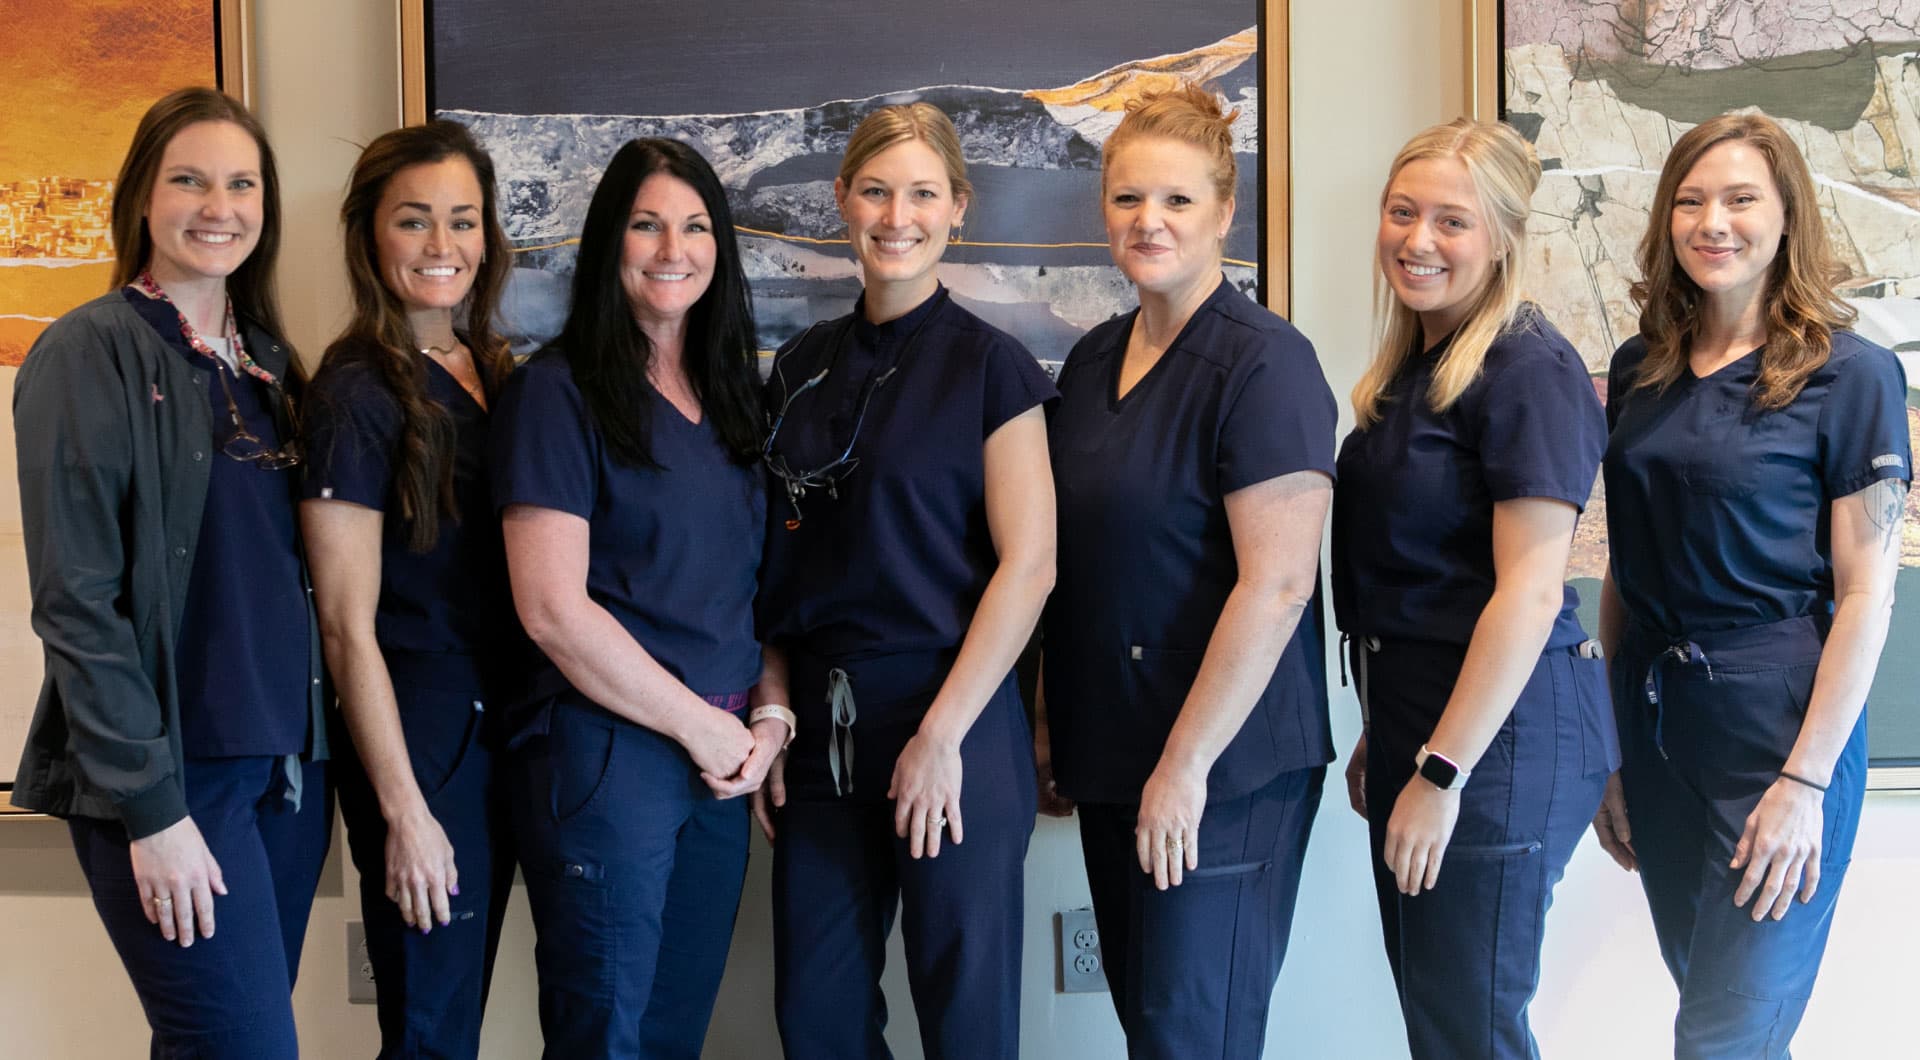 Adult dentistry team with Dr. Sewel